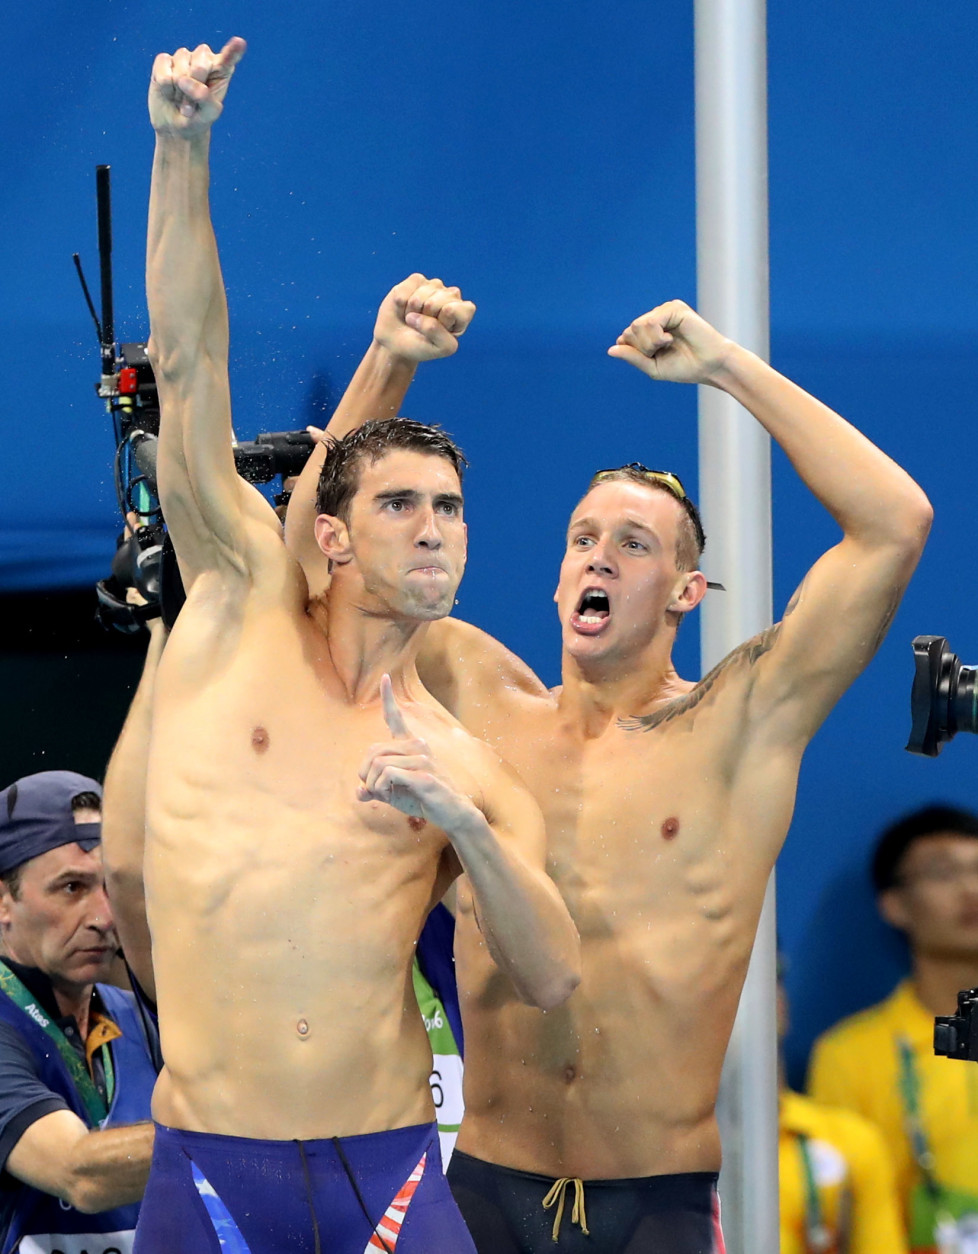 Caeleb Dressel and Michael Phelps, left, from the United States, celebrate winning the final of the men's 4x100-meter freestyle relay during the swimming competitions at the 2016 Summer Olympics, Sunday, Aug. 7, 2016, in Rio de Janeiro, Brazil. (AP Photo/Lee Jin-man)